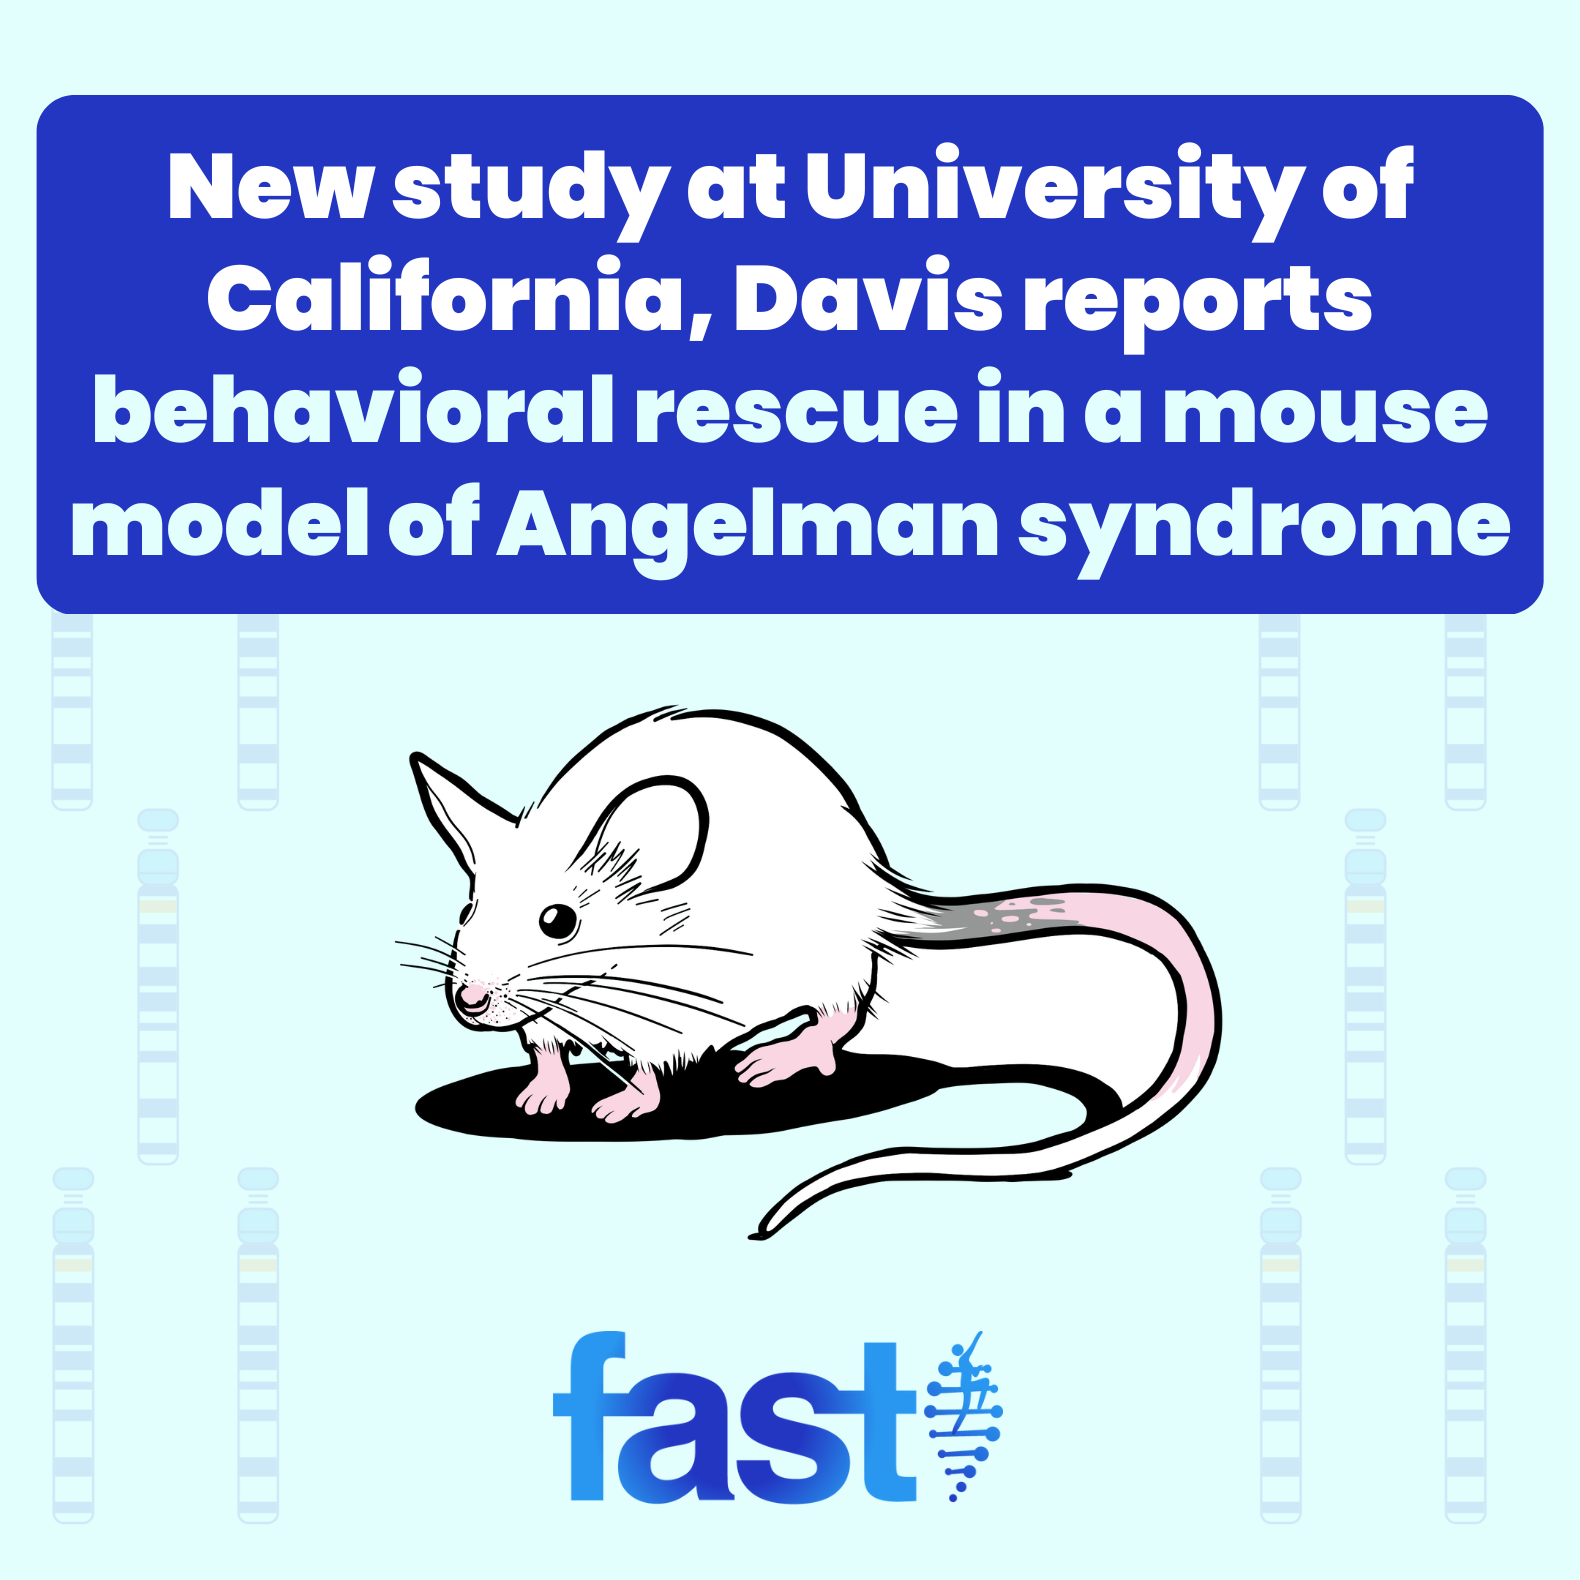 New study at University of California, Davis reports behavioral rescue in a mouse model of Angelman syndrome, with a drawing of a mouse